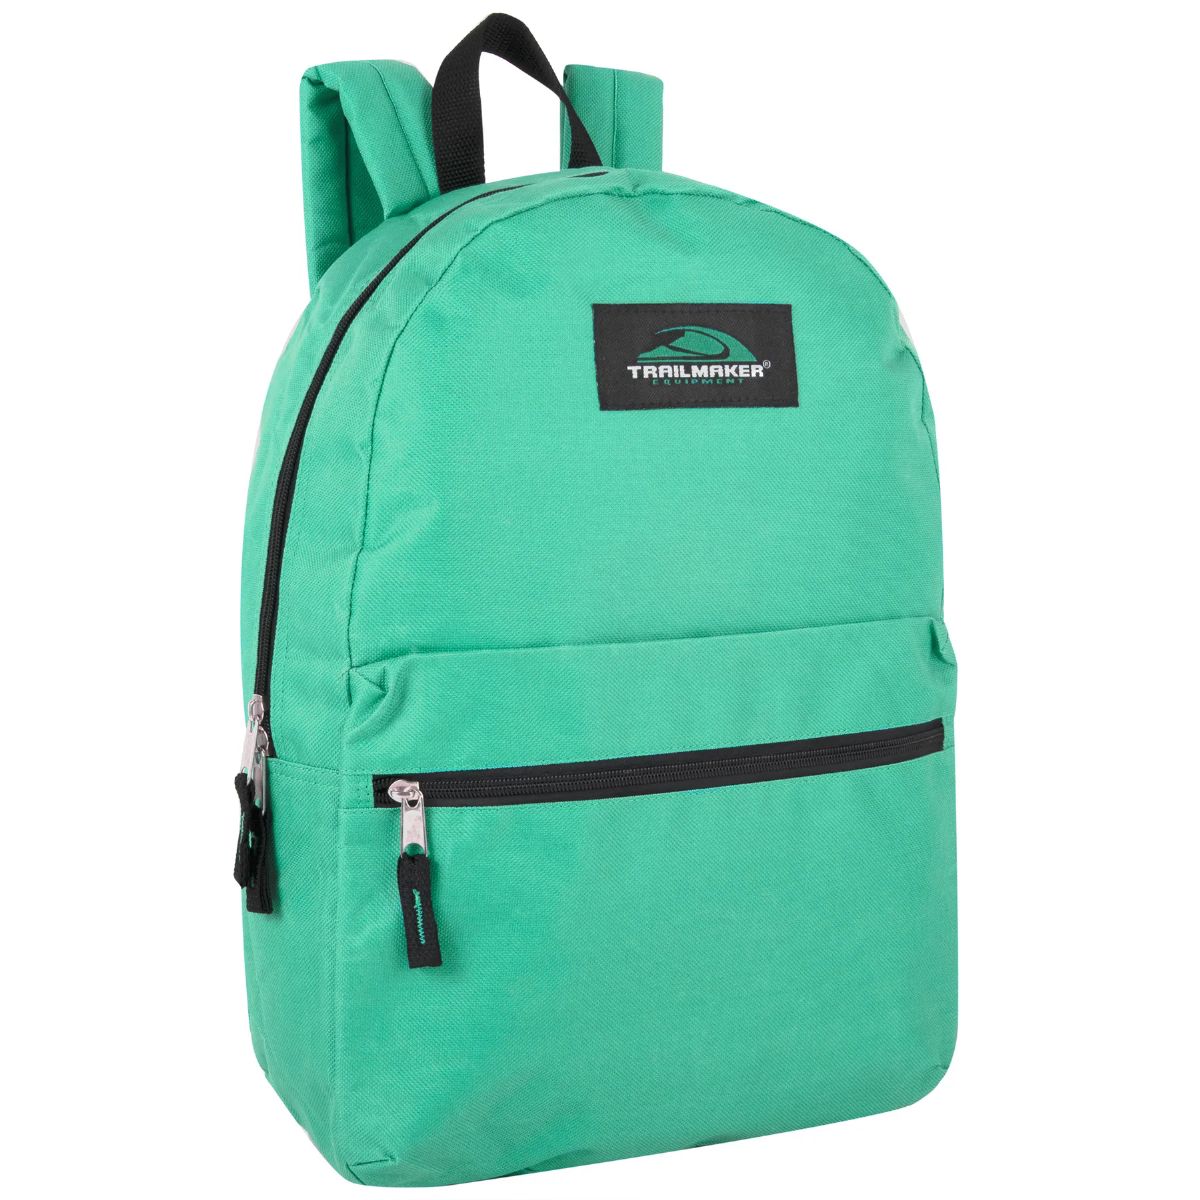 24 Pieces of Classic 17 Inch Backpack In Aqua Color